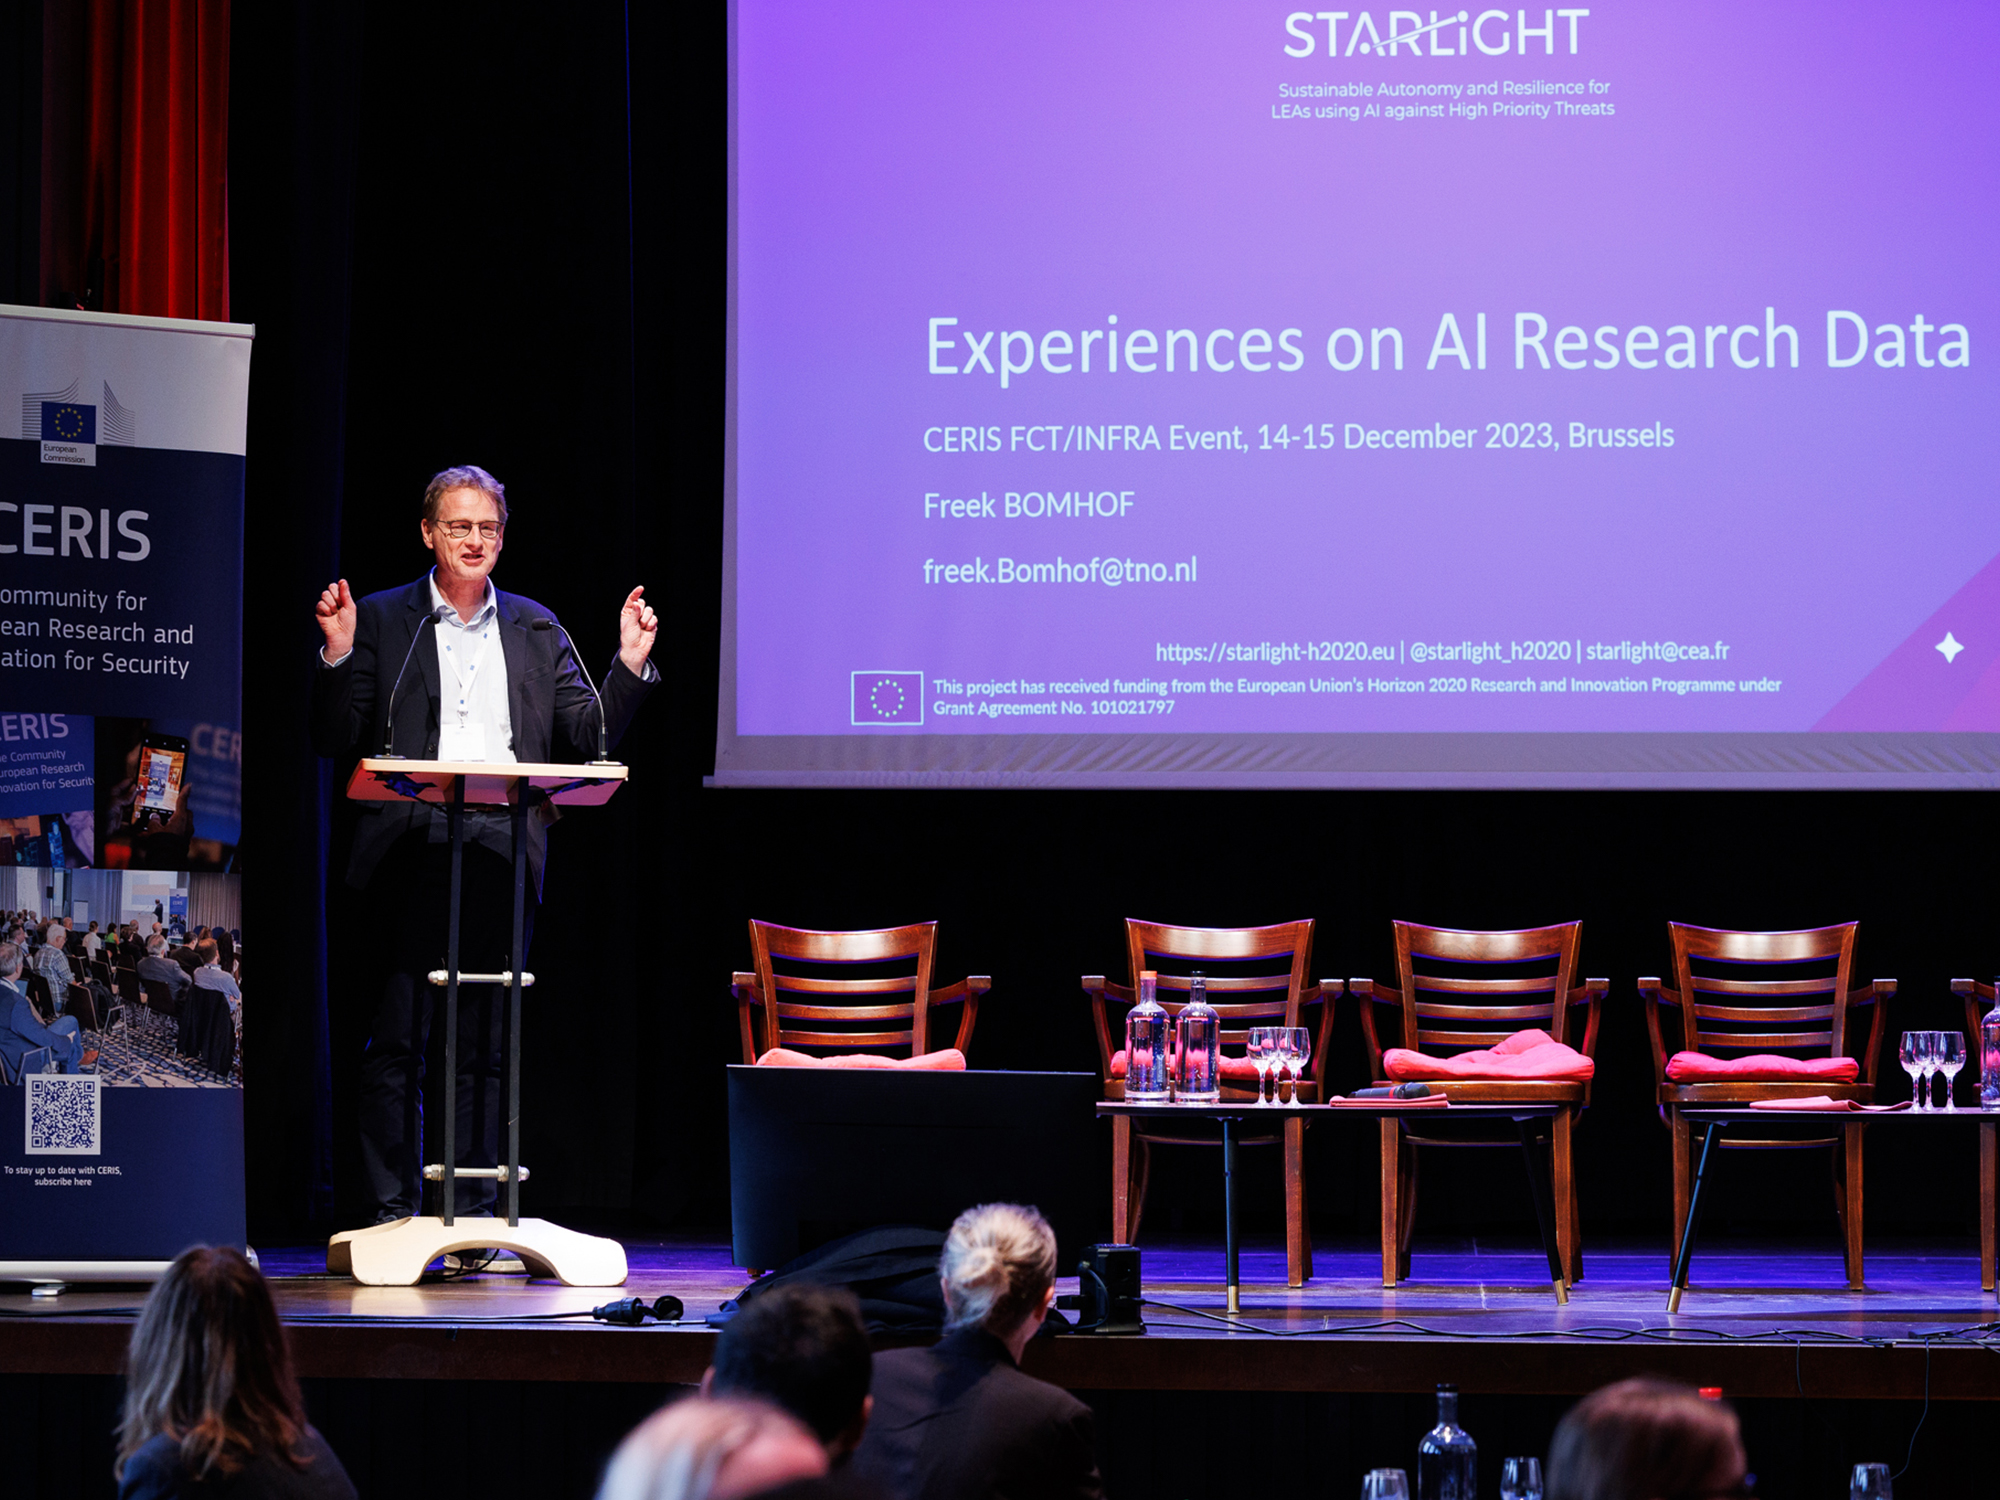 STARLIGHT at the CERIS FCT/INFRA Annual Event